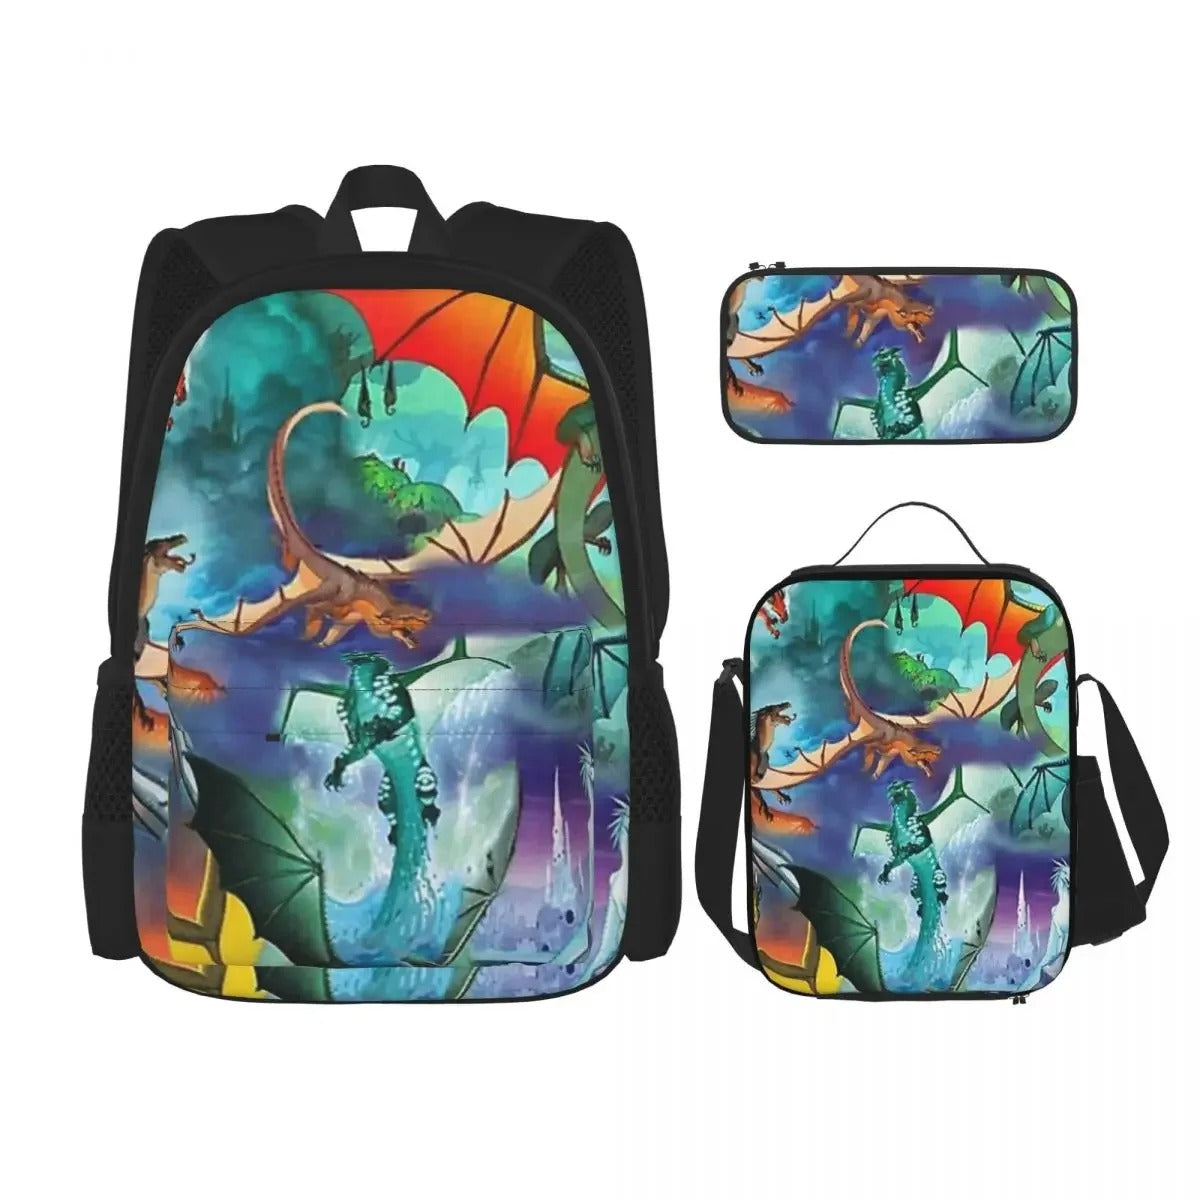 Dragon Backpack with Wings - Color 1